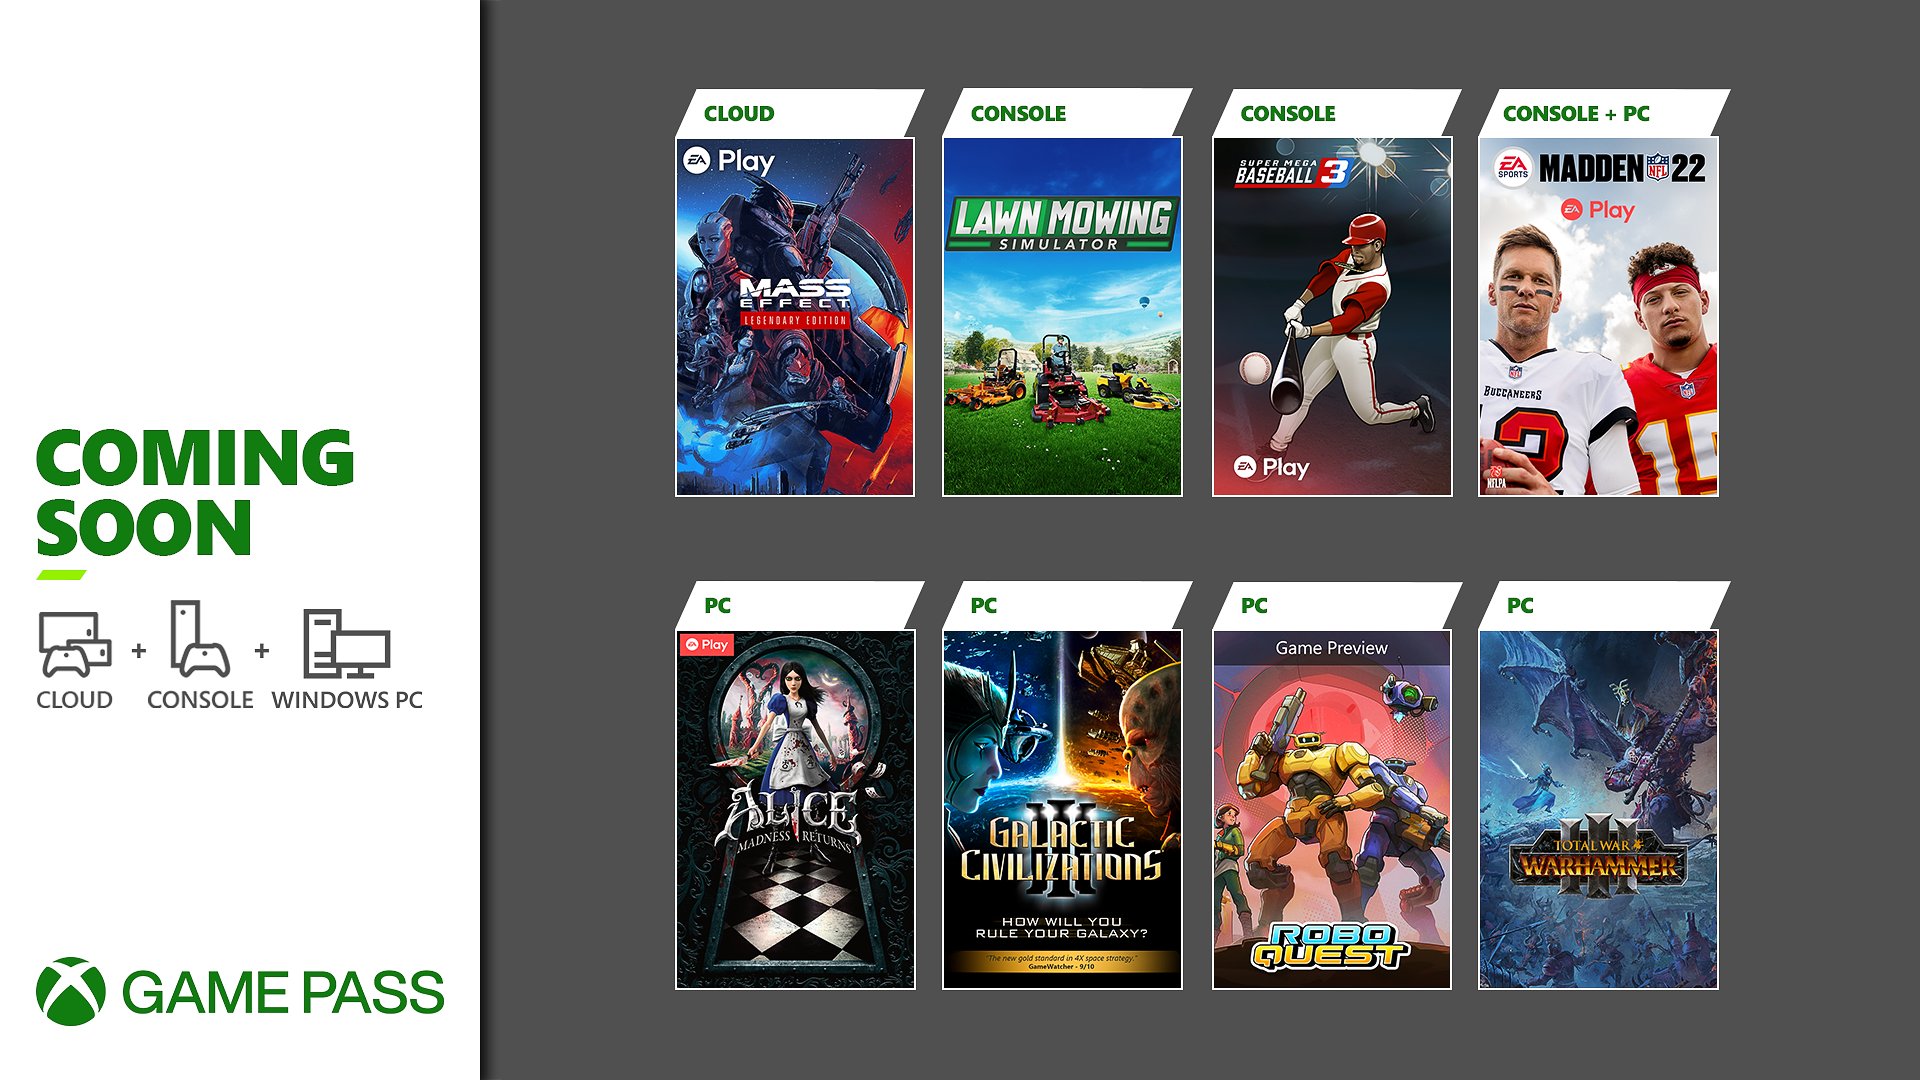 Xbox Game Pass - Coming Soon